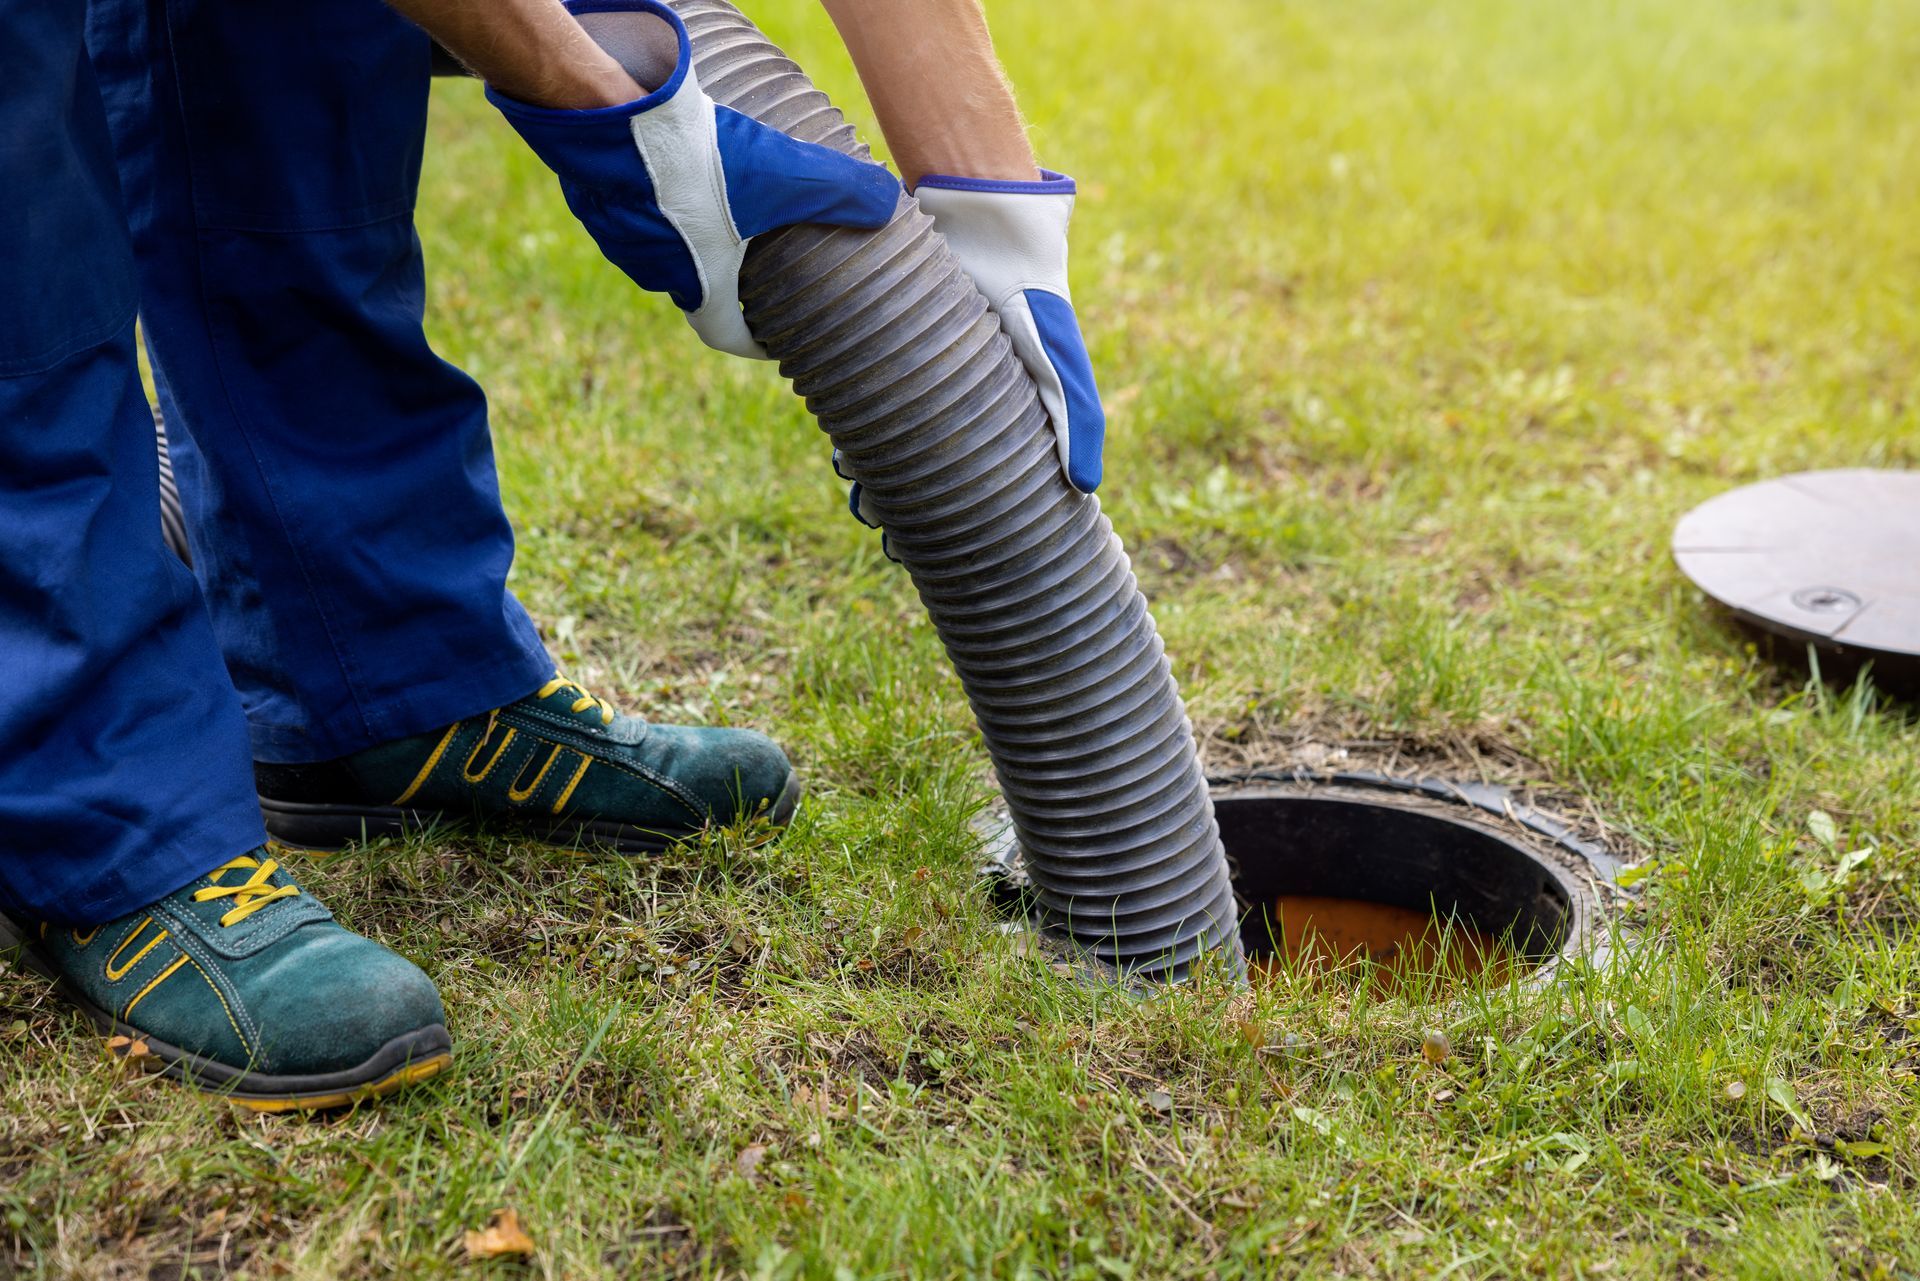 Complete Septic Cleaning at Reliable Septic Services in Mt Olive, AL